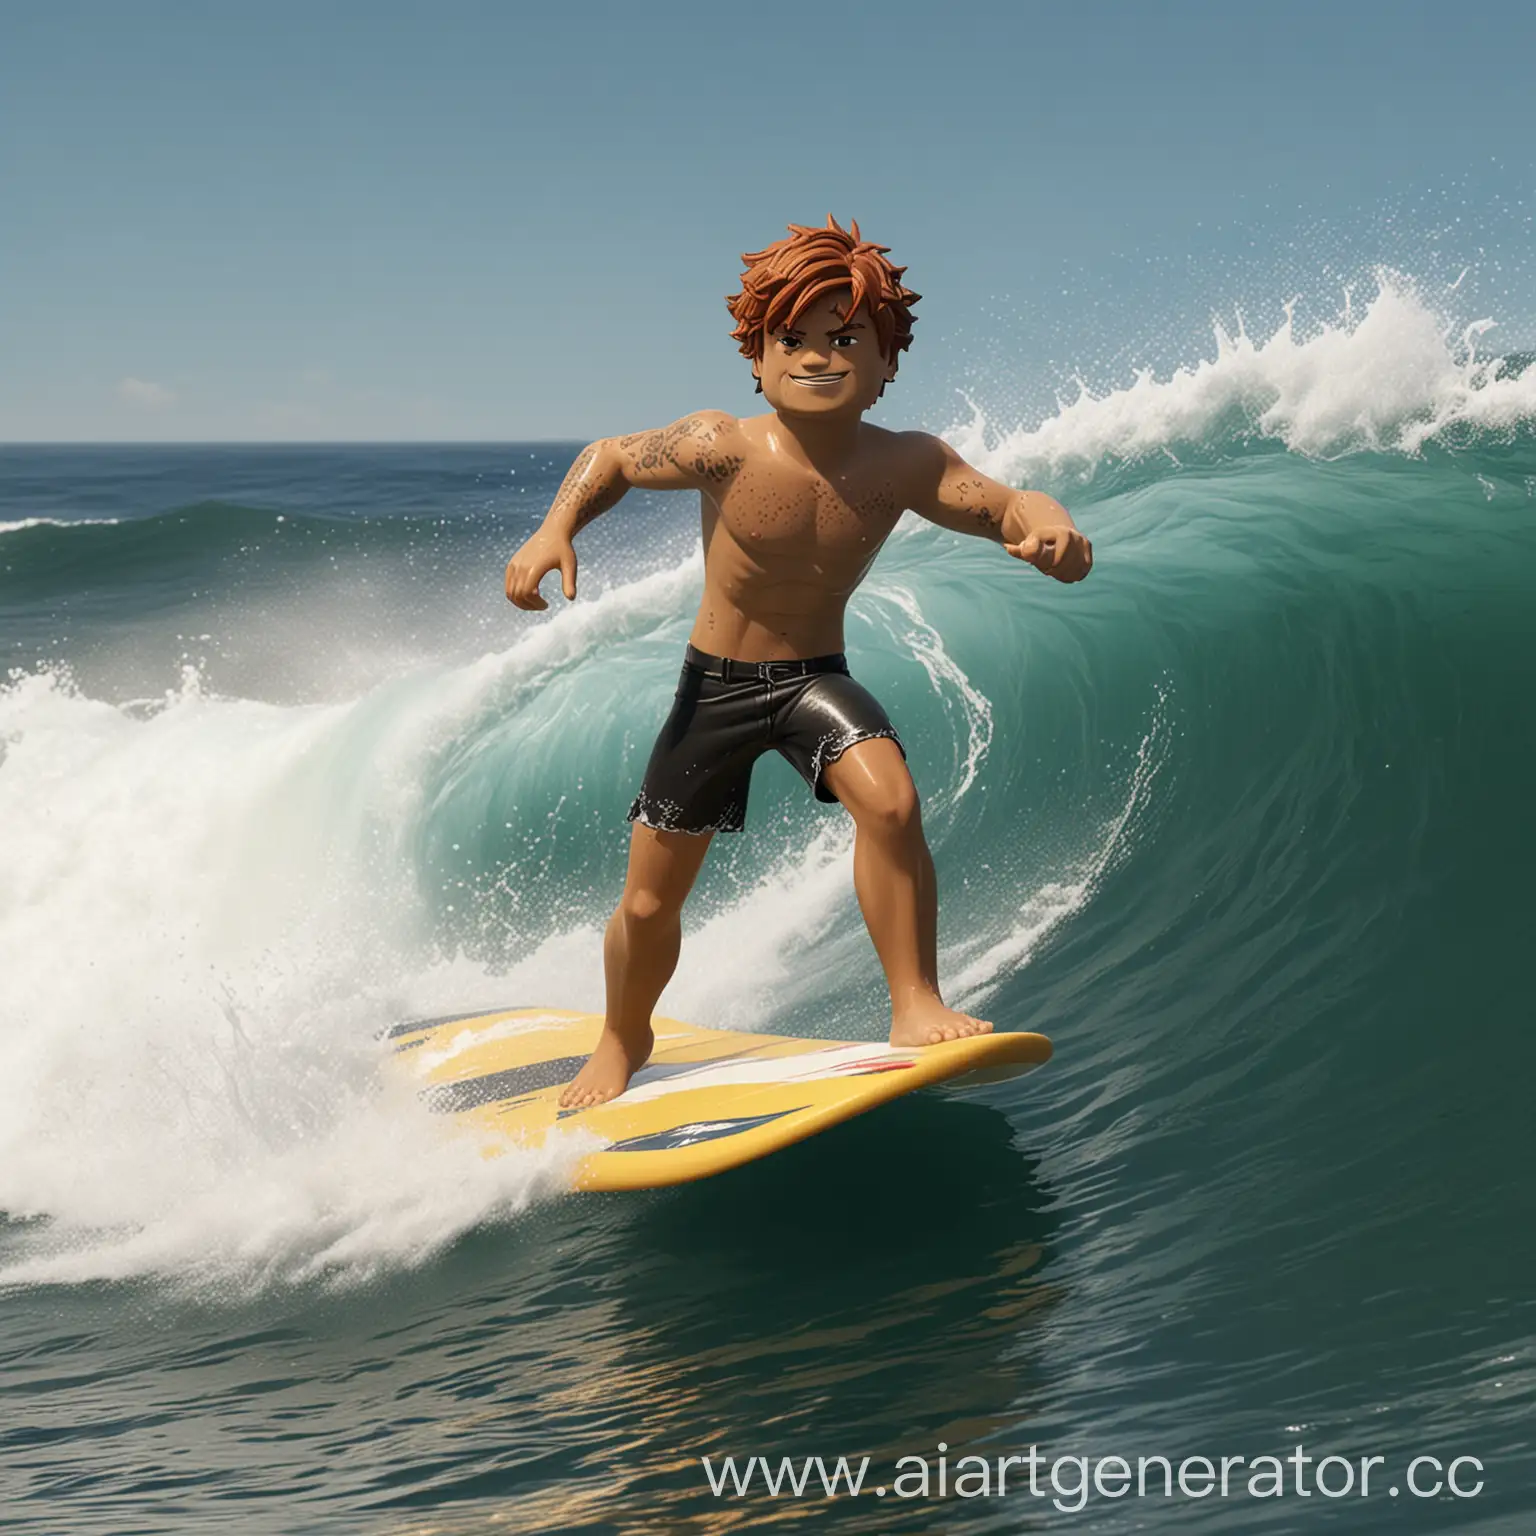 Roblox-Avatar-Surfing-on-a-Wave-with-a-Surfboard